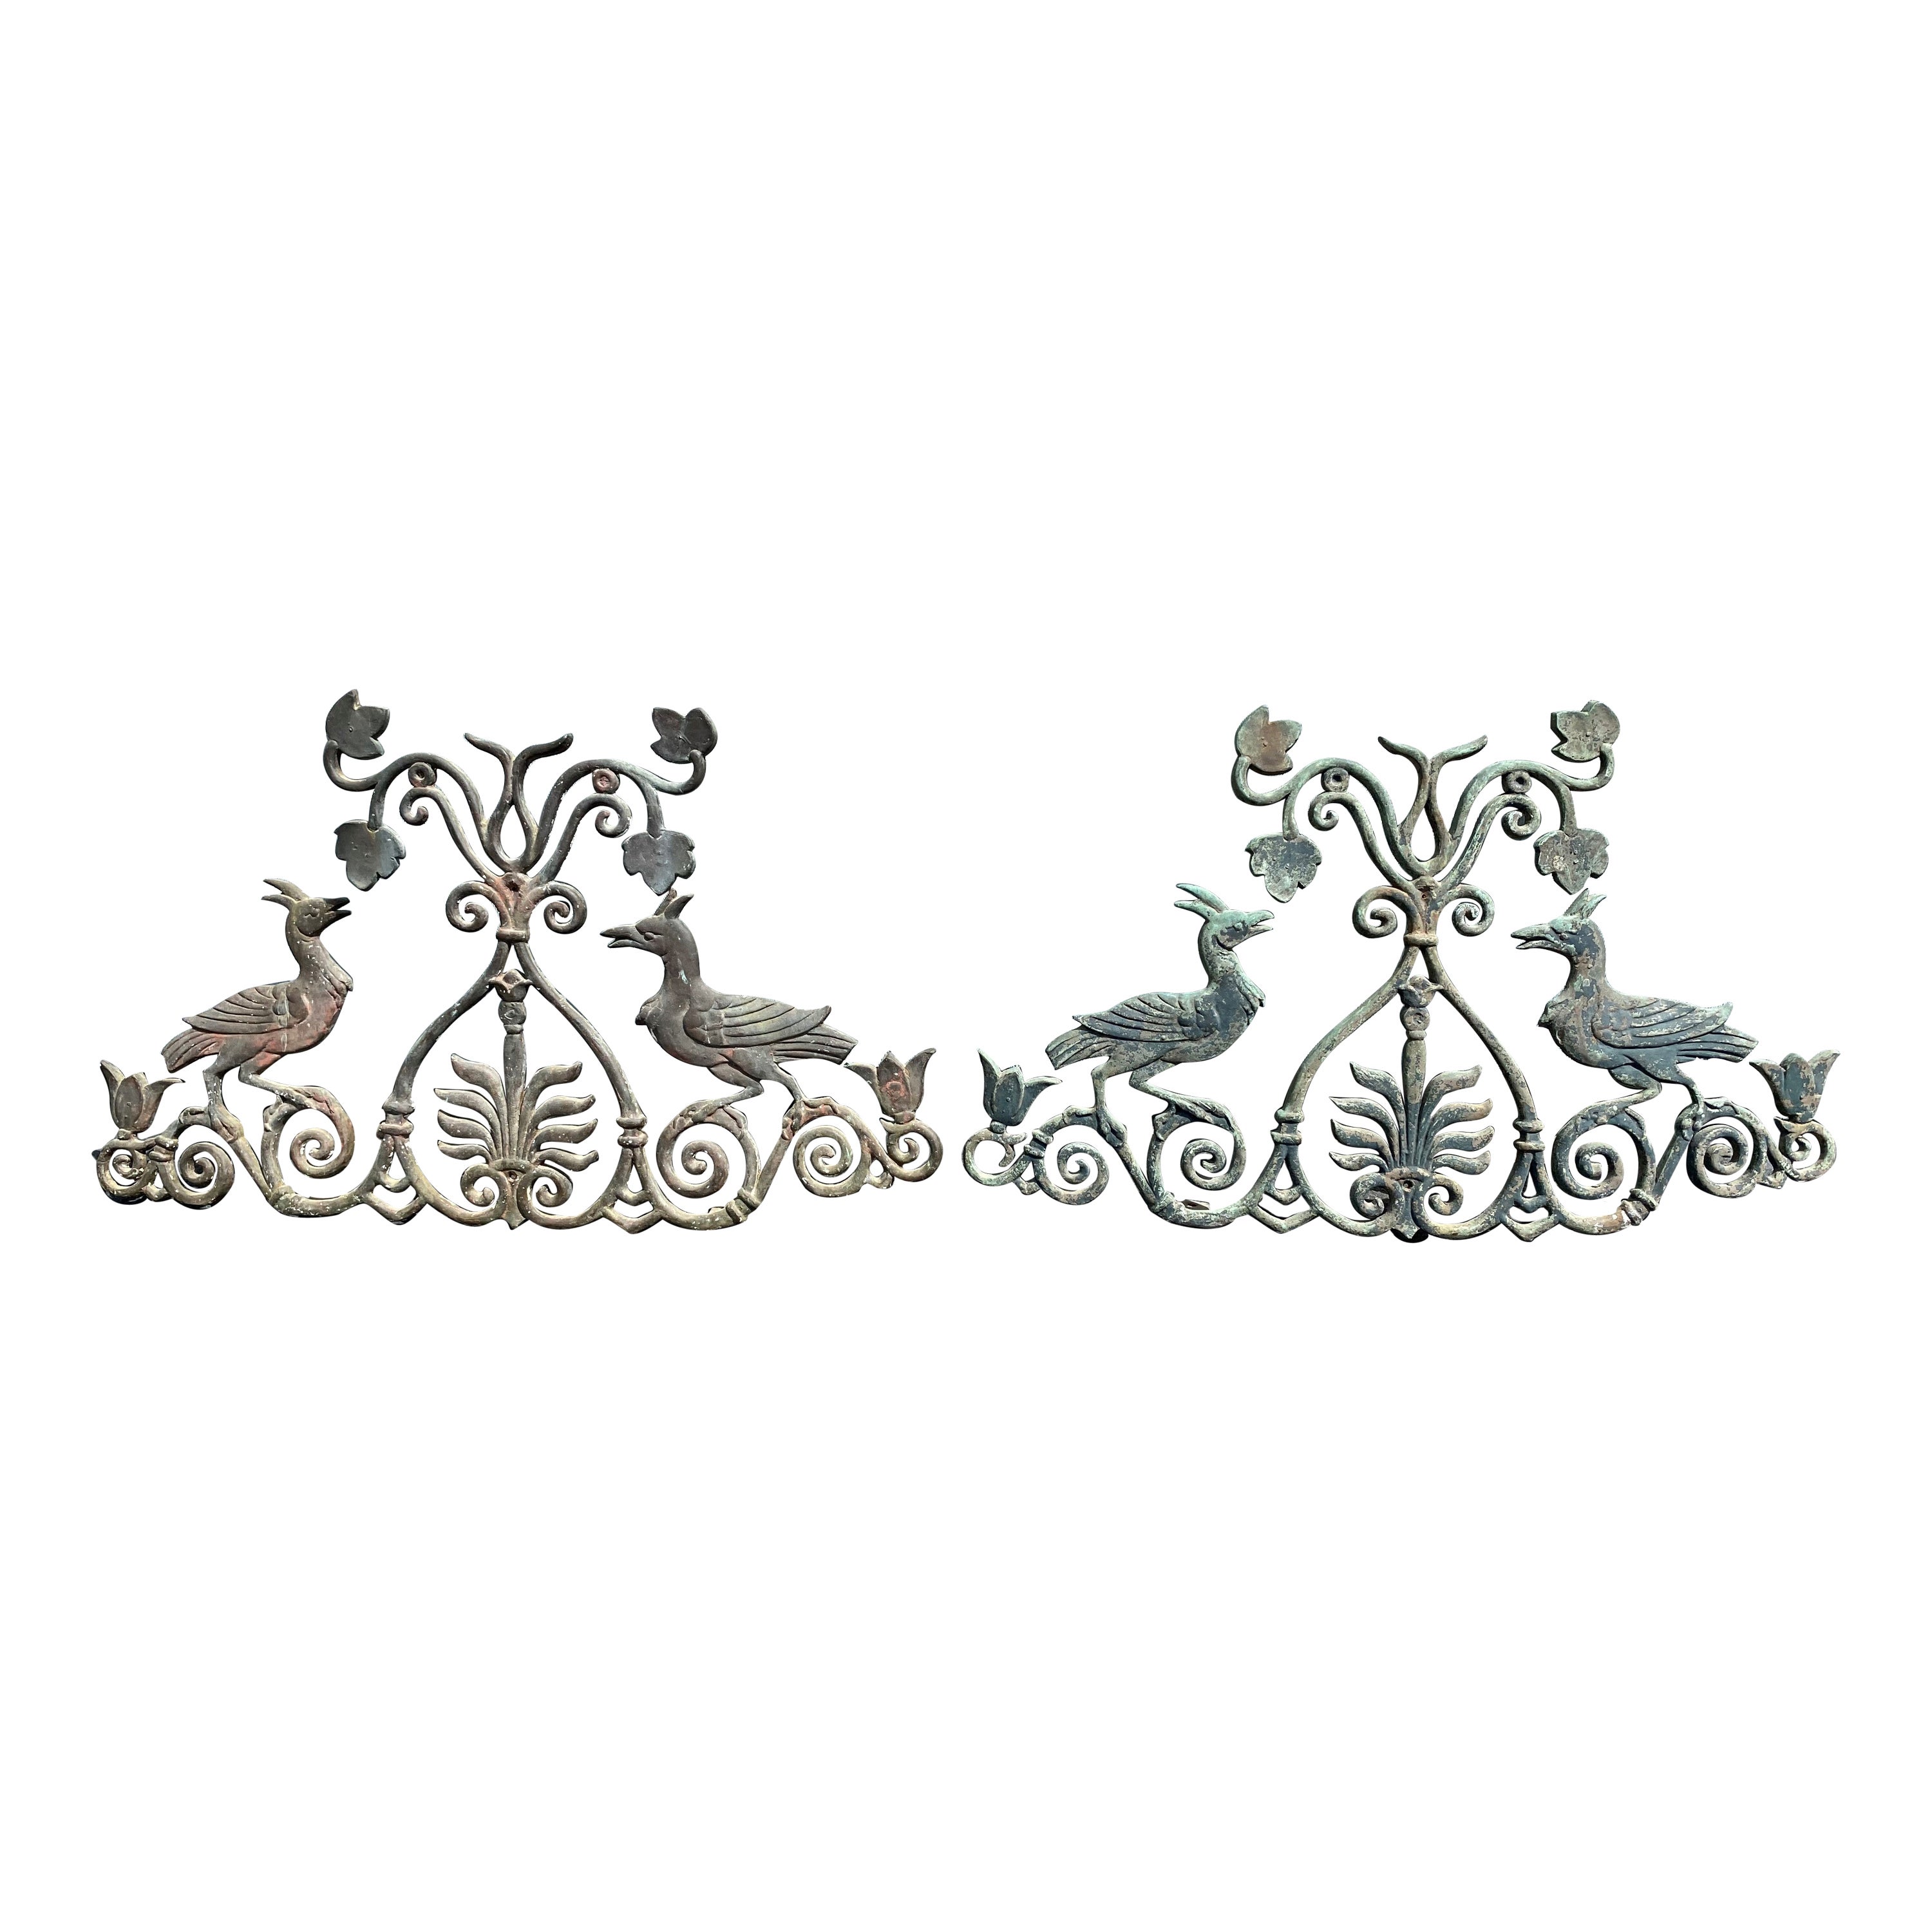 Pair of 19th Century Bronze Window Guards From a Philadelphia Townhouse